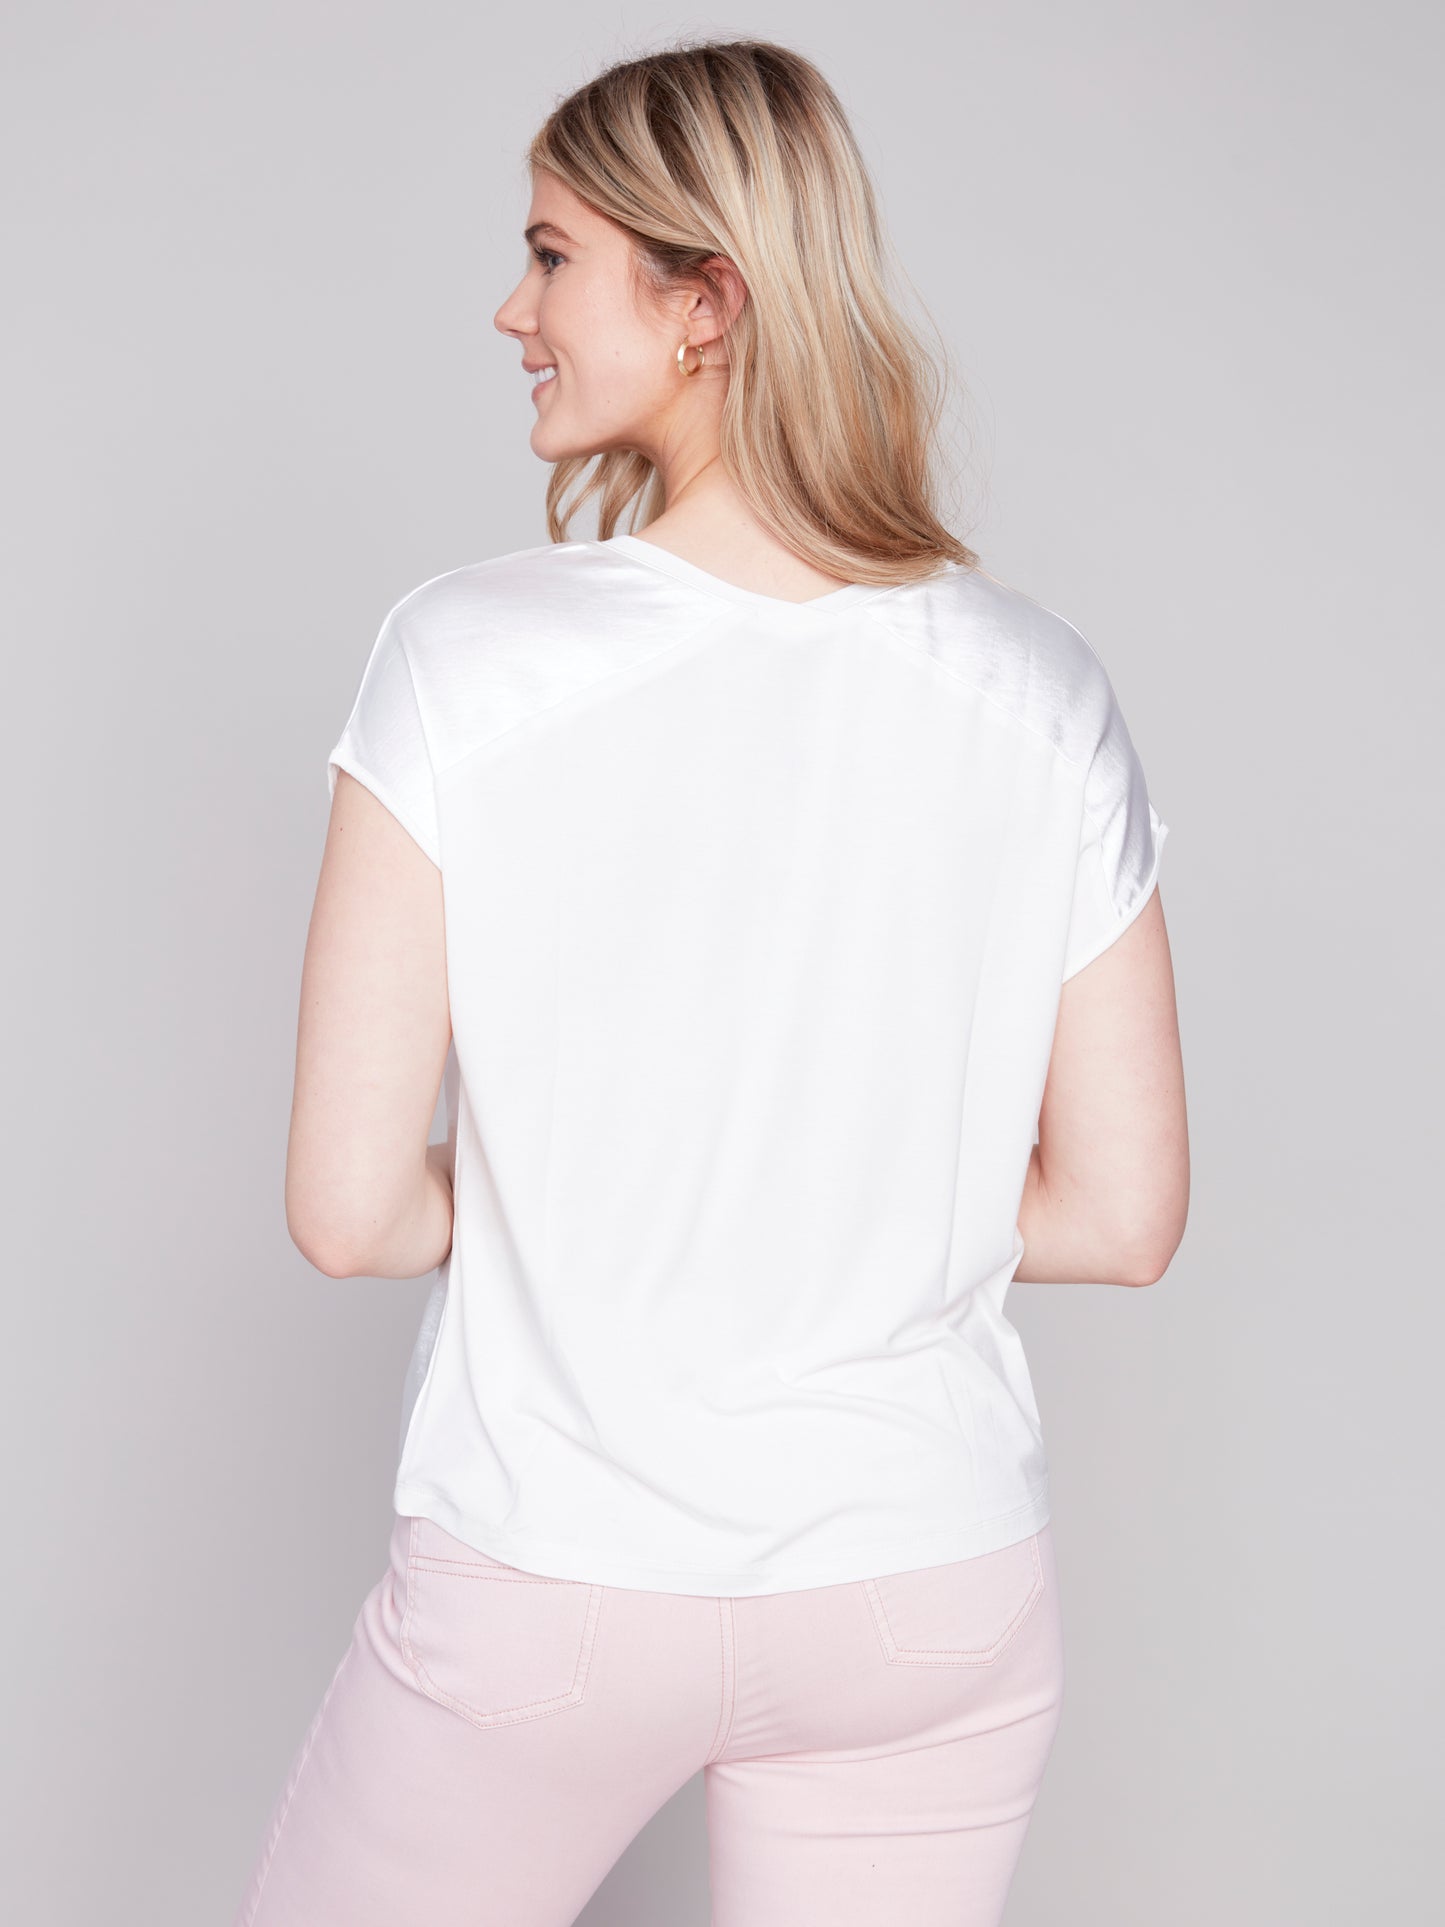 Woman in a Charlie B satin knit combo V-neck top and pink pants posing against a grey background.